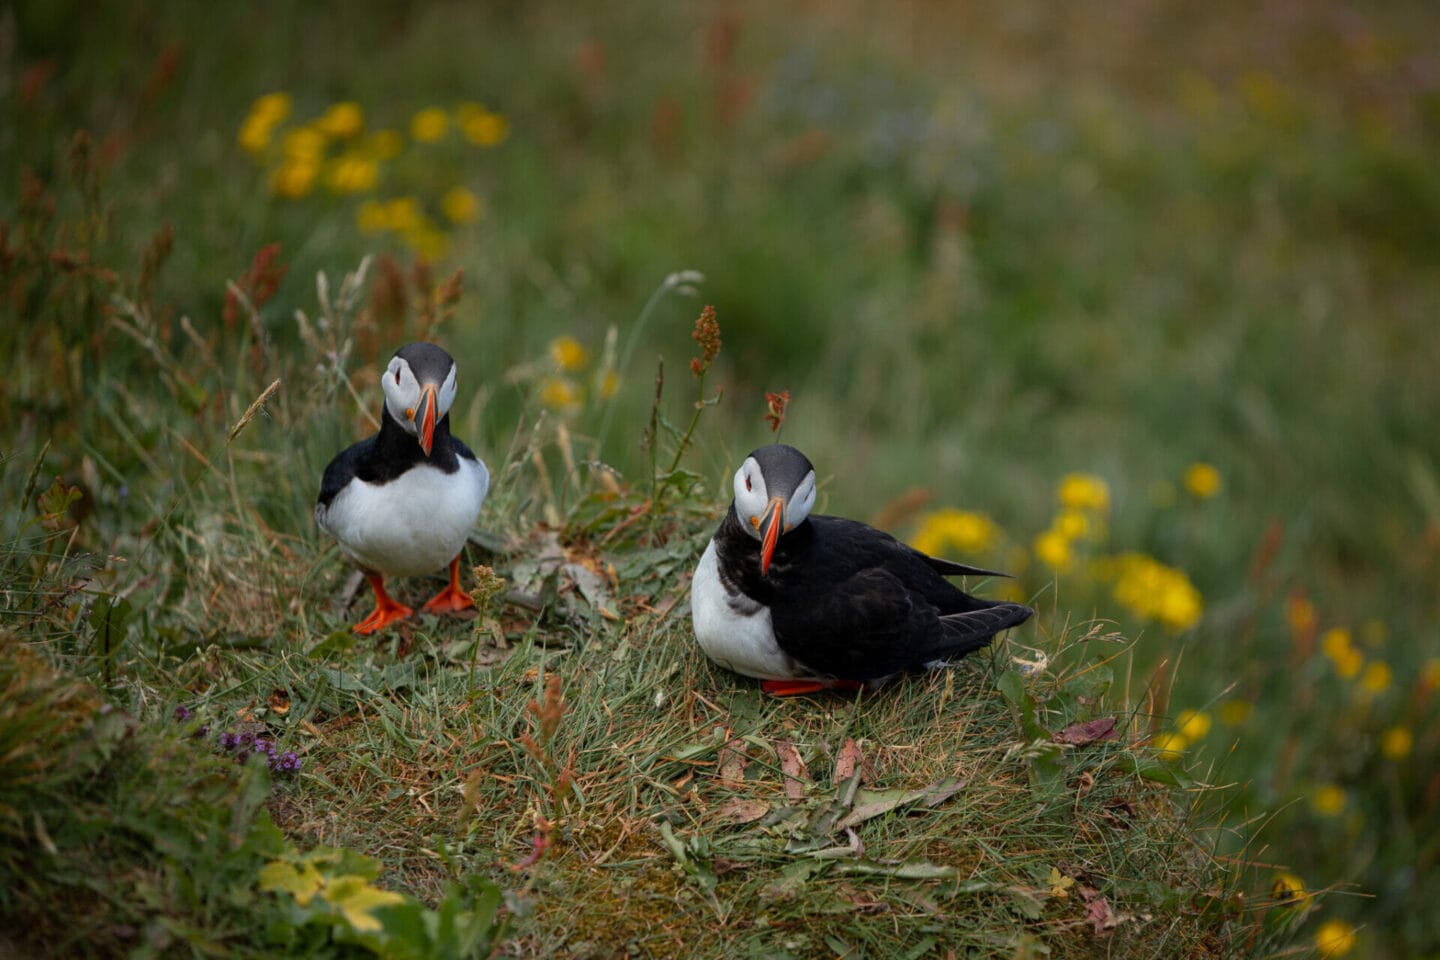 6 Day Iceland Itinerary - Where to see puffins